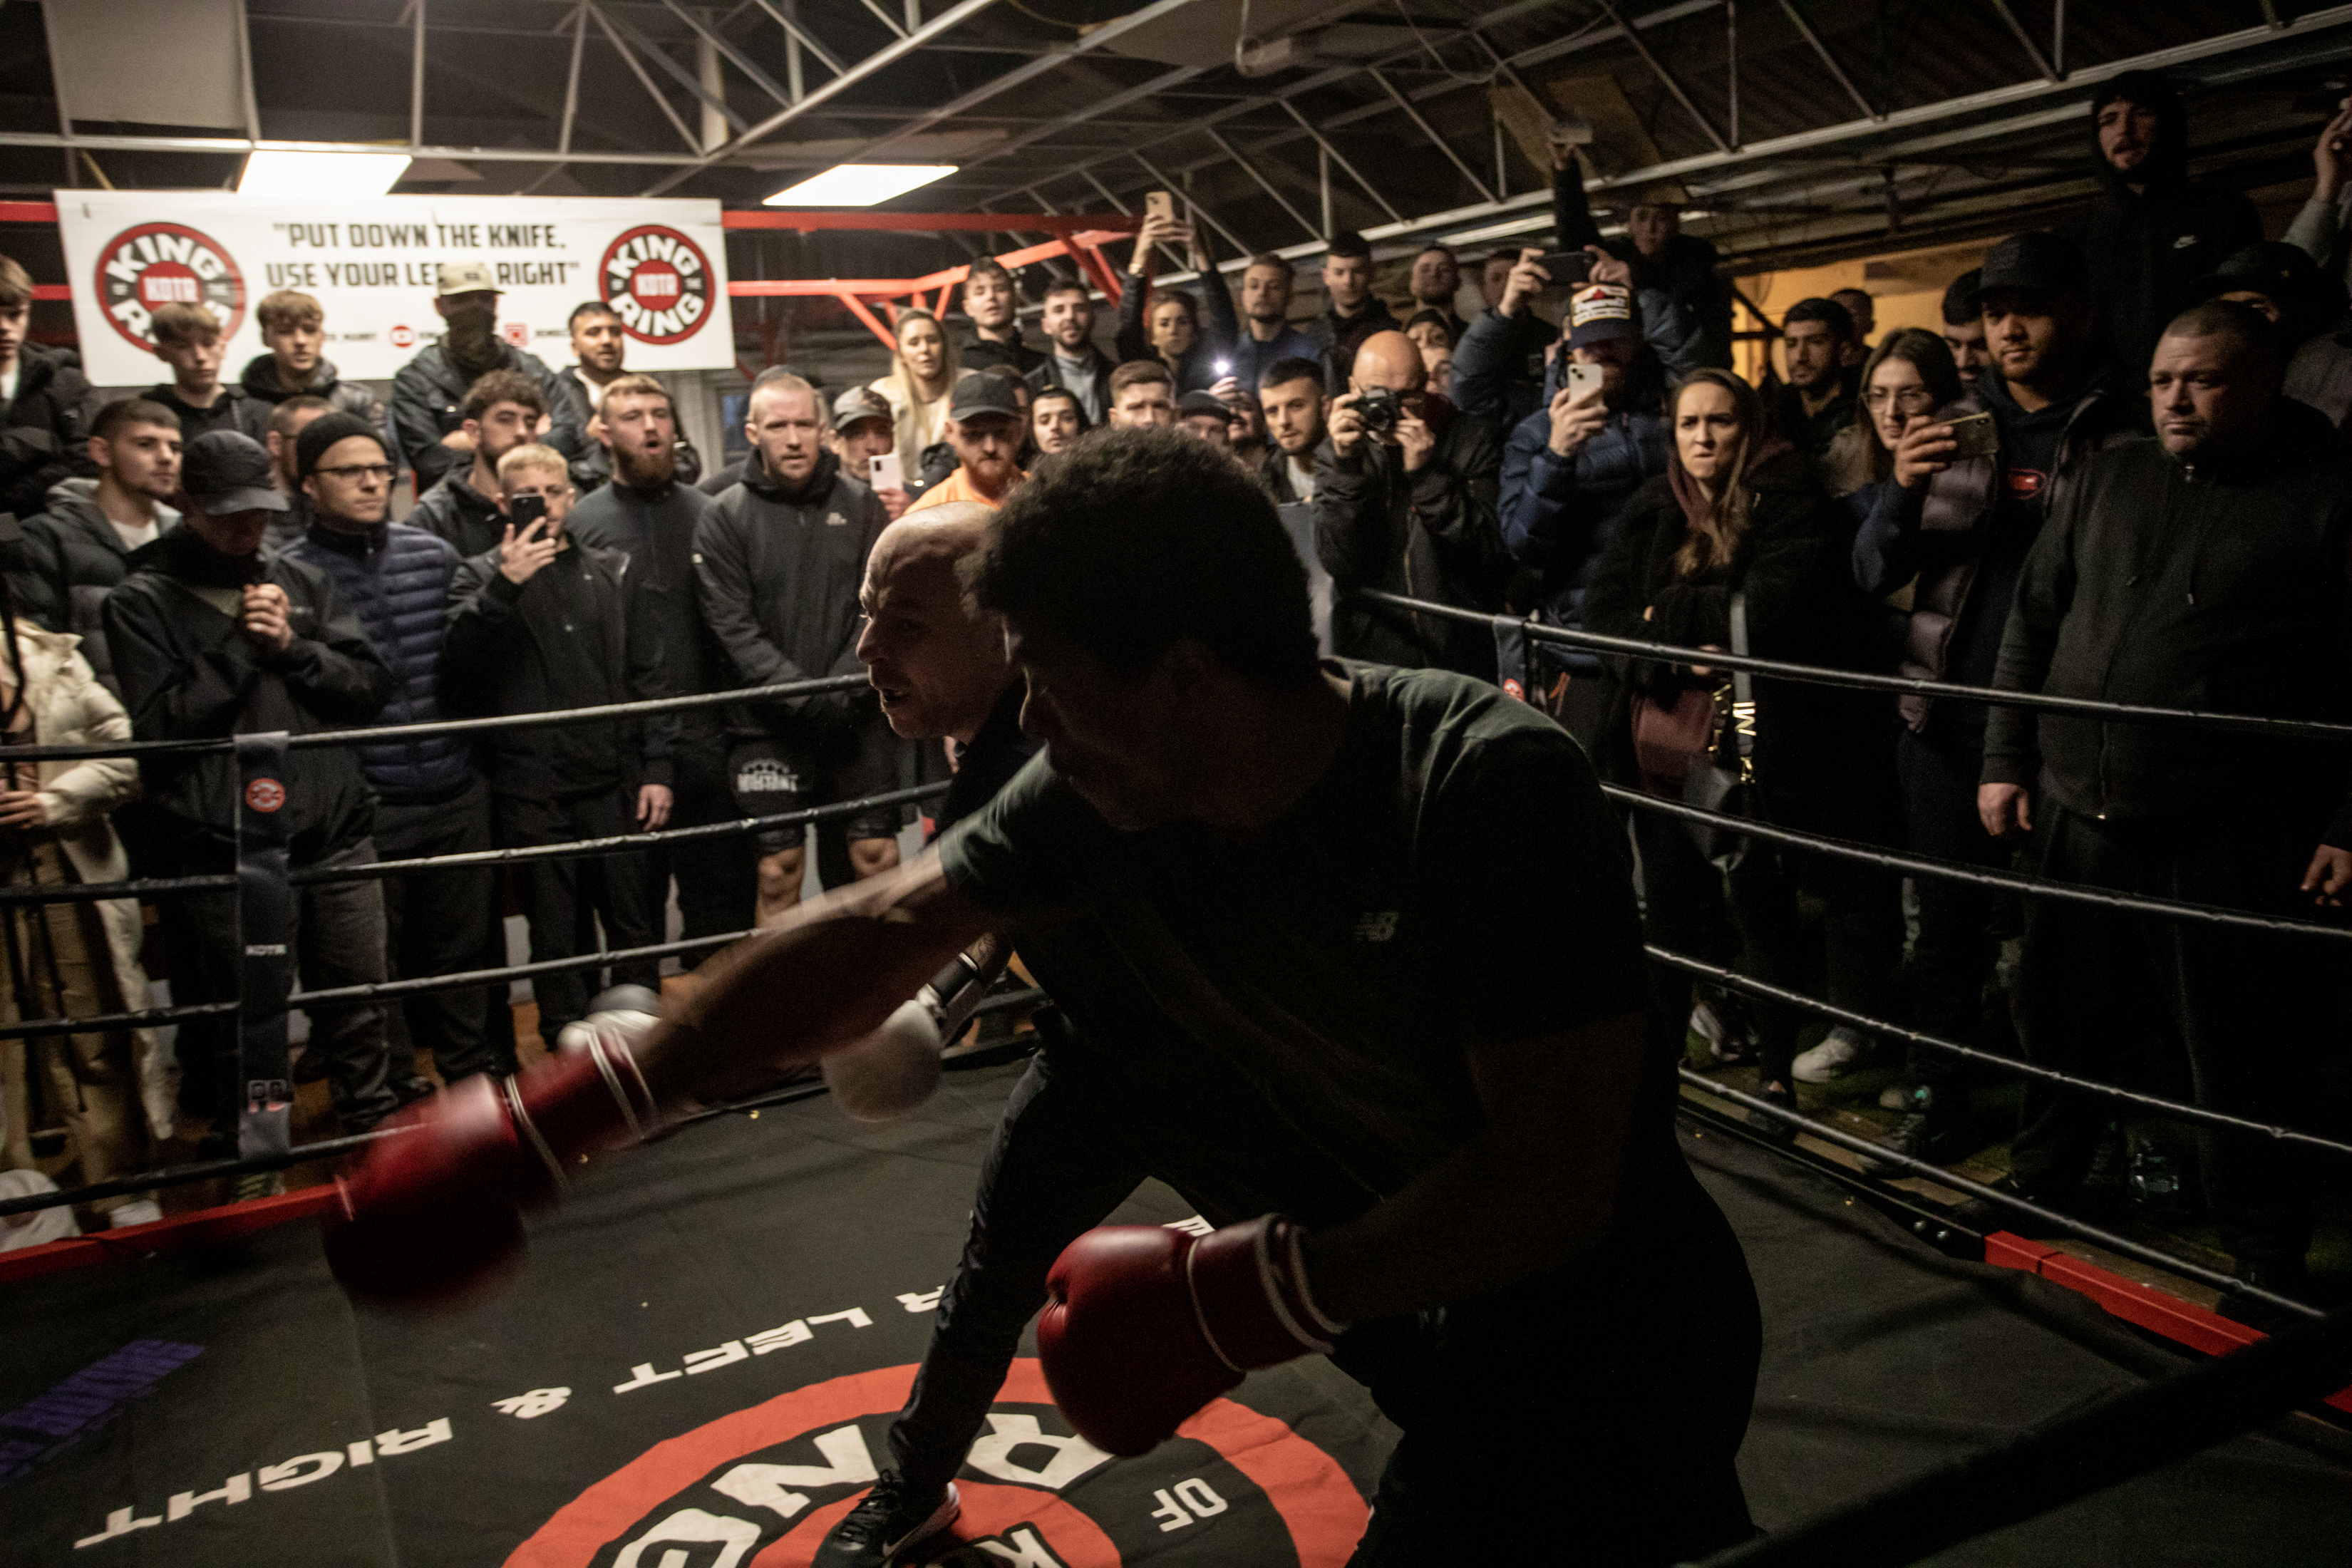 A Look Inside Underground Fight Club King of the Ring hq pic